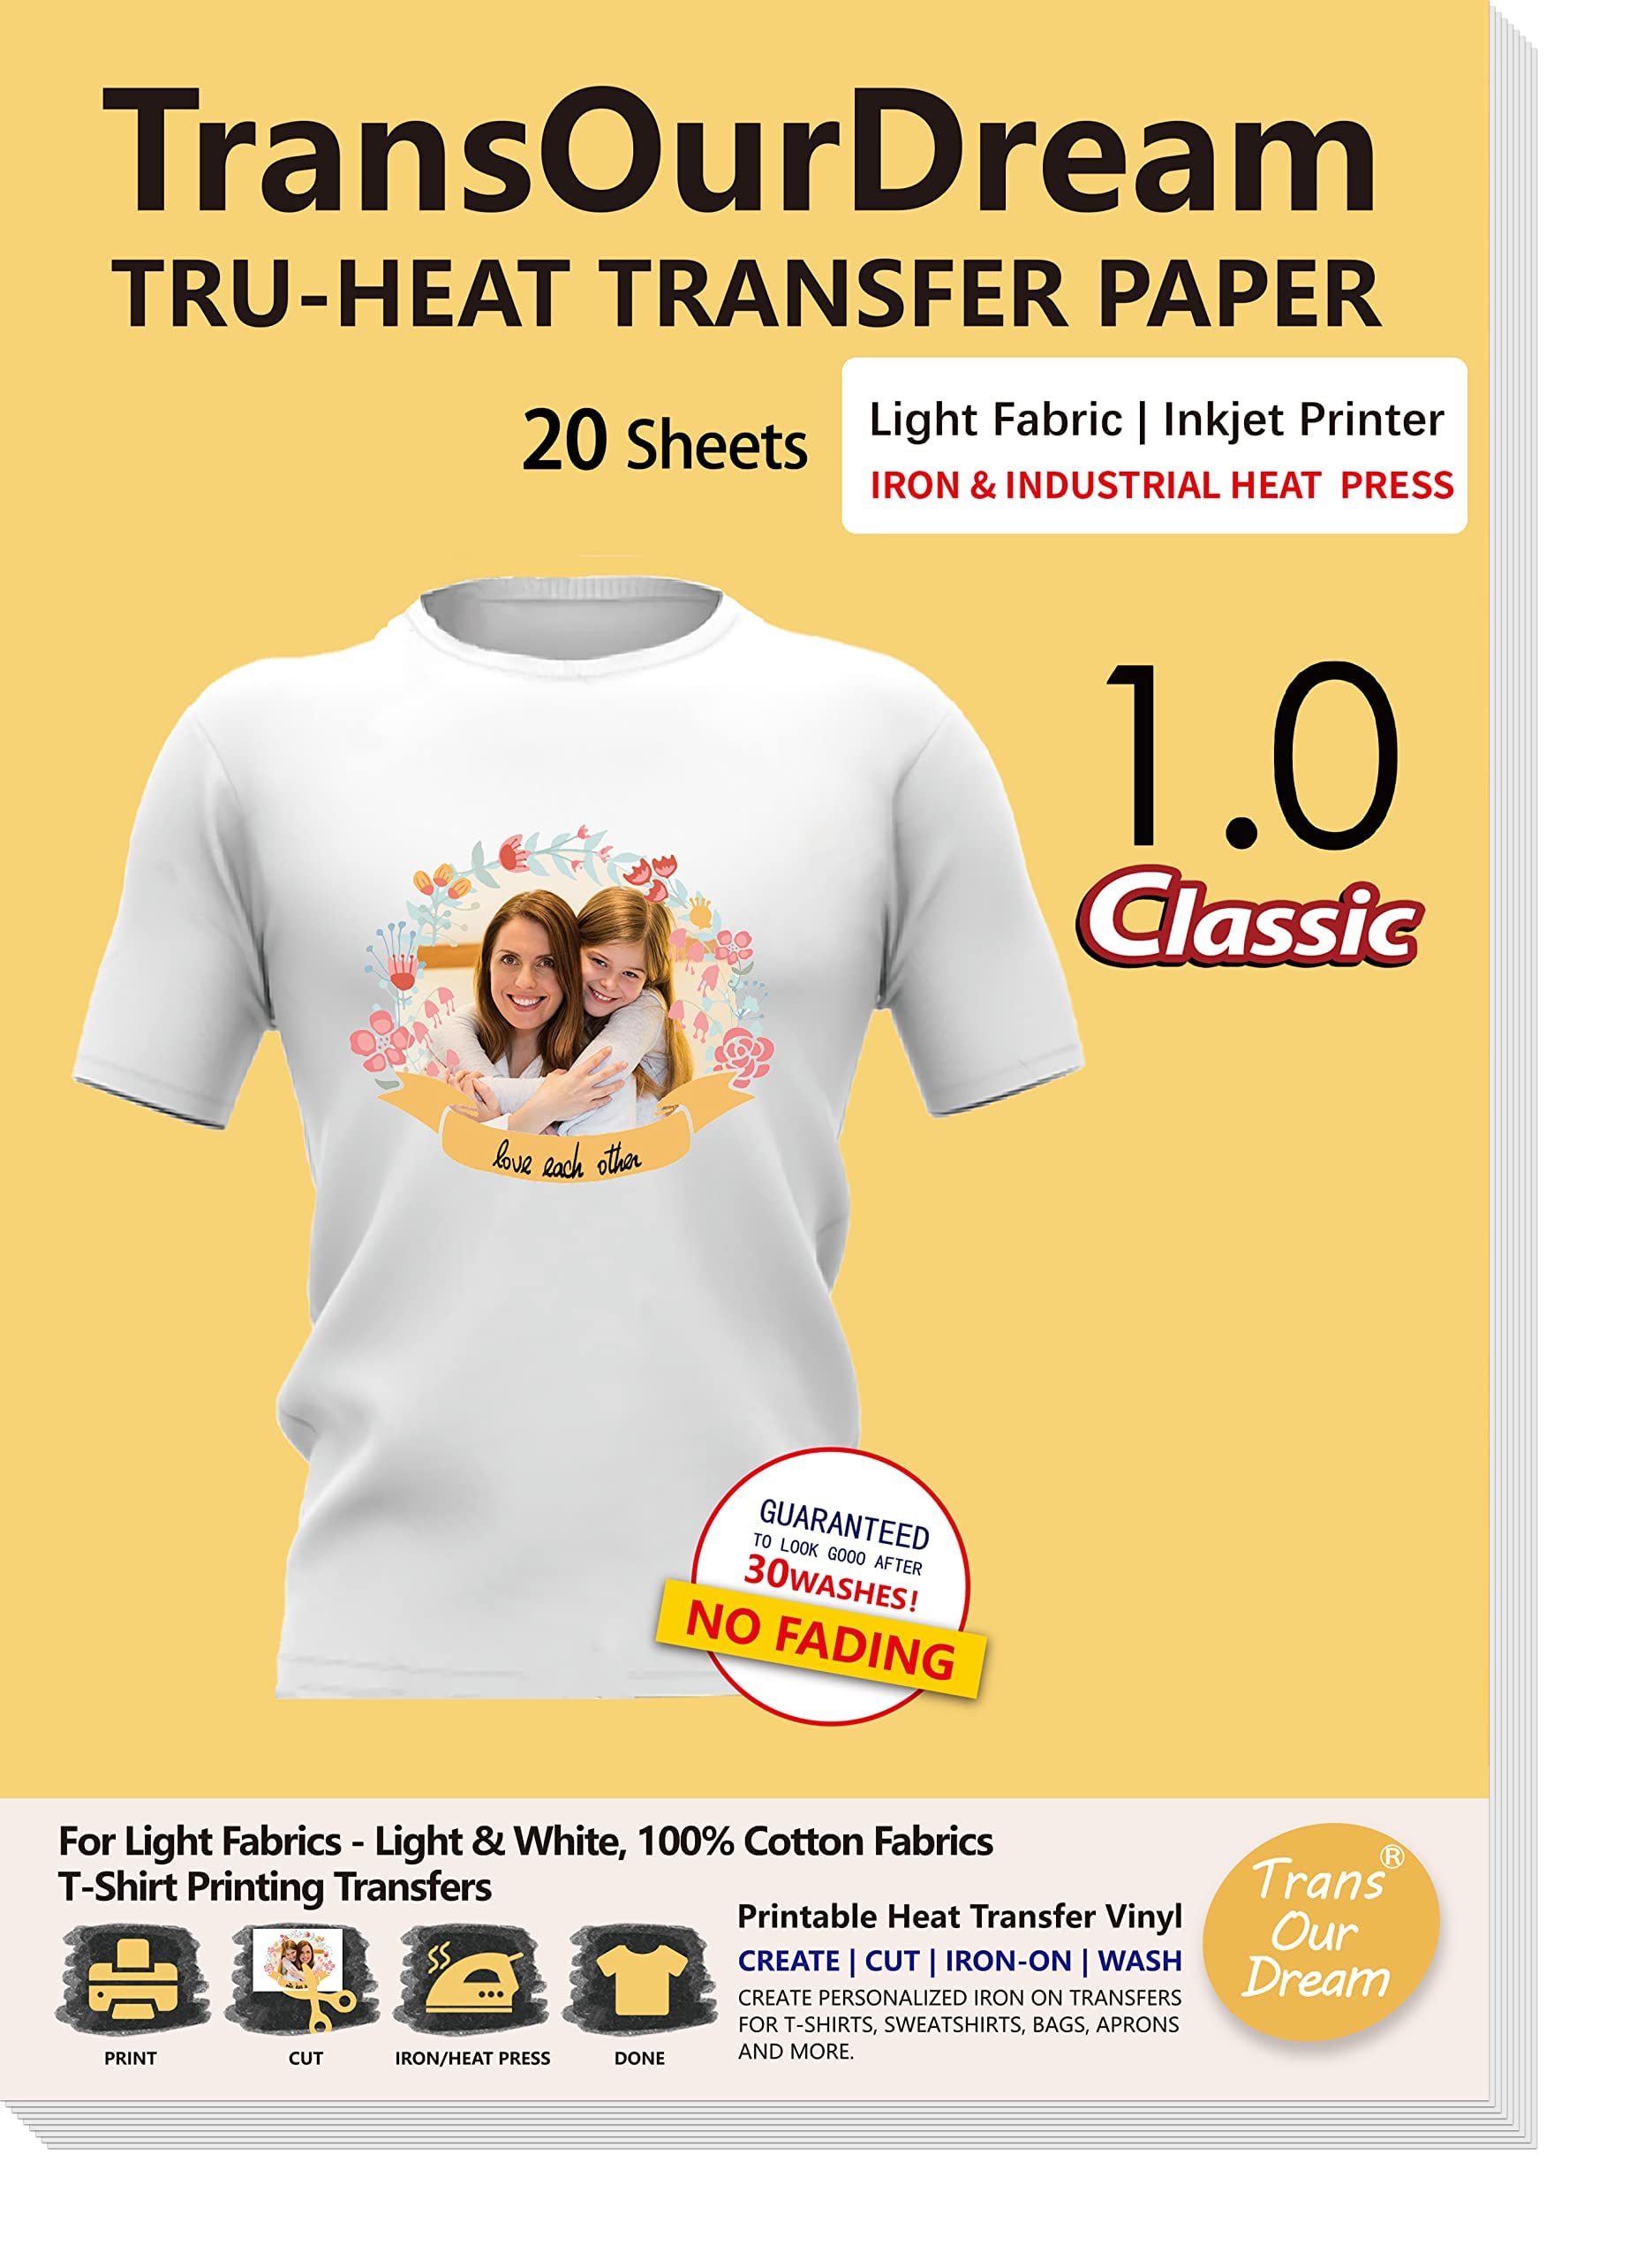  Custom Heat Transfer Paper with Your Own Text Logo Image for  Customized T Shirt Aprons Bag or Other Dark and Light Fabric Without  Cutting or Weeding Like Heat Transfer Vinyl Just